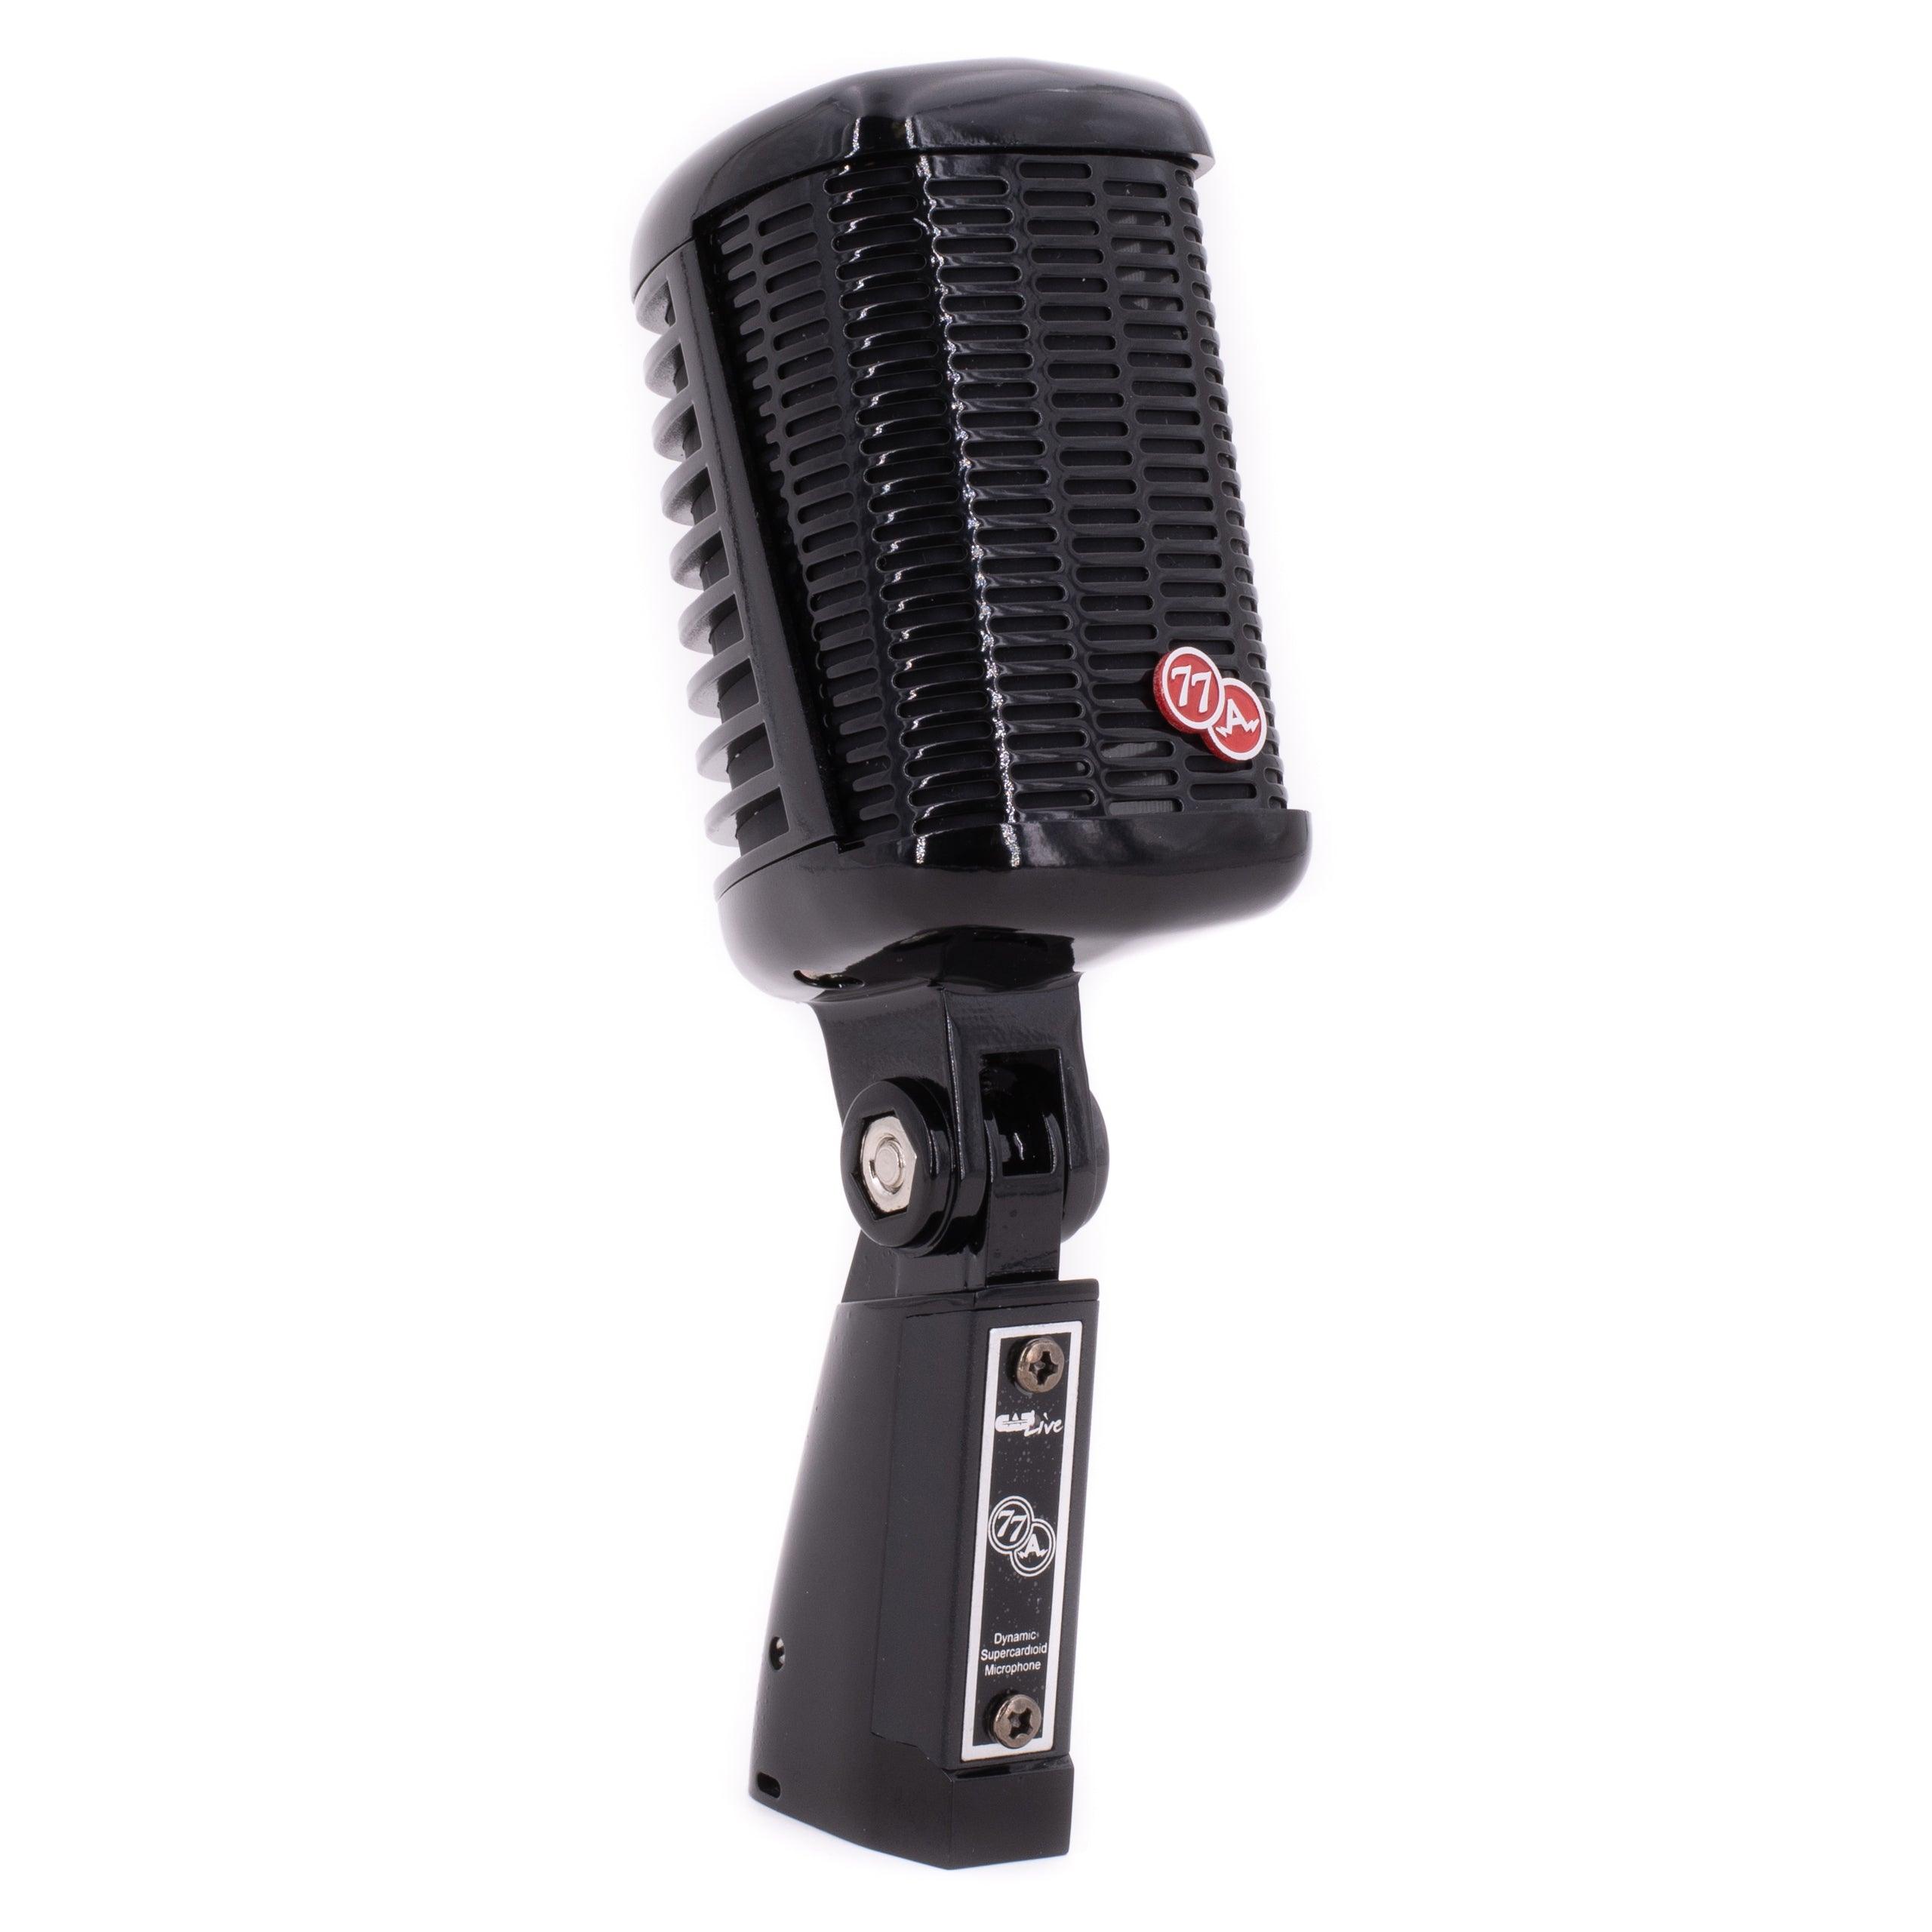 CAD Live A77 Supercardioid Large Diaphragm Dynamic Side Address Microphone ~ Gloss Black - DY Pro Audio